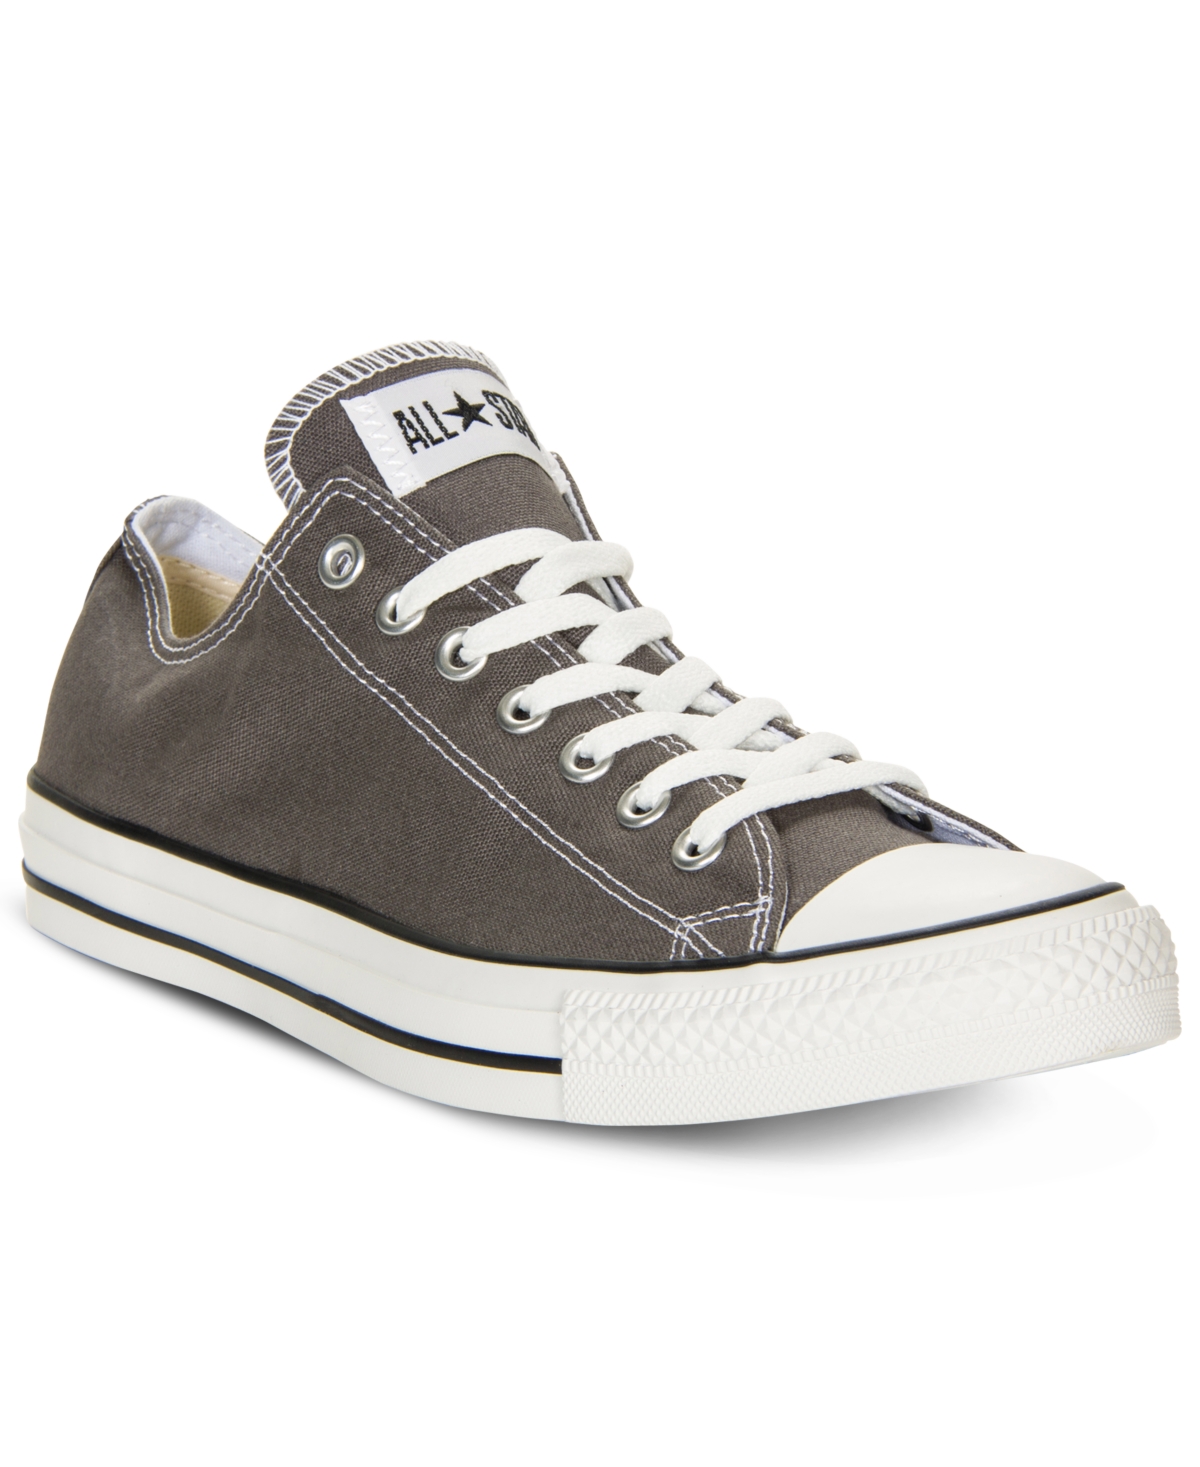 UPC 022859975926 product image for Converse Men's Chuck Taylor Low Top Sneakers from Finish Line | upcitemdb.com